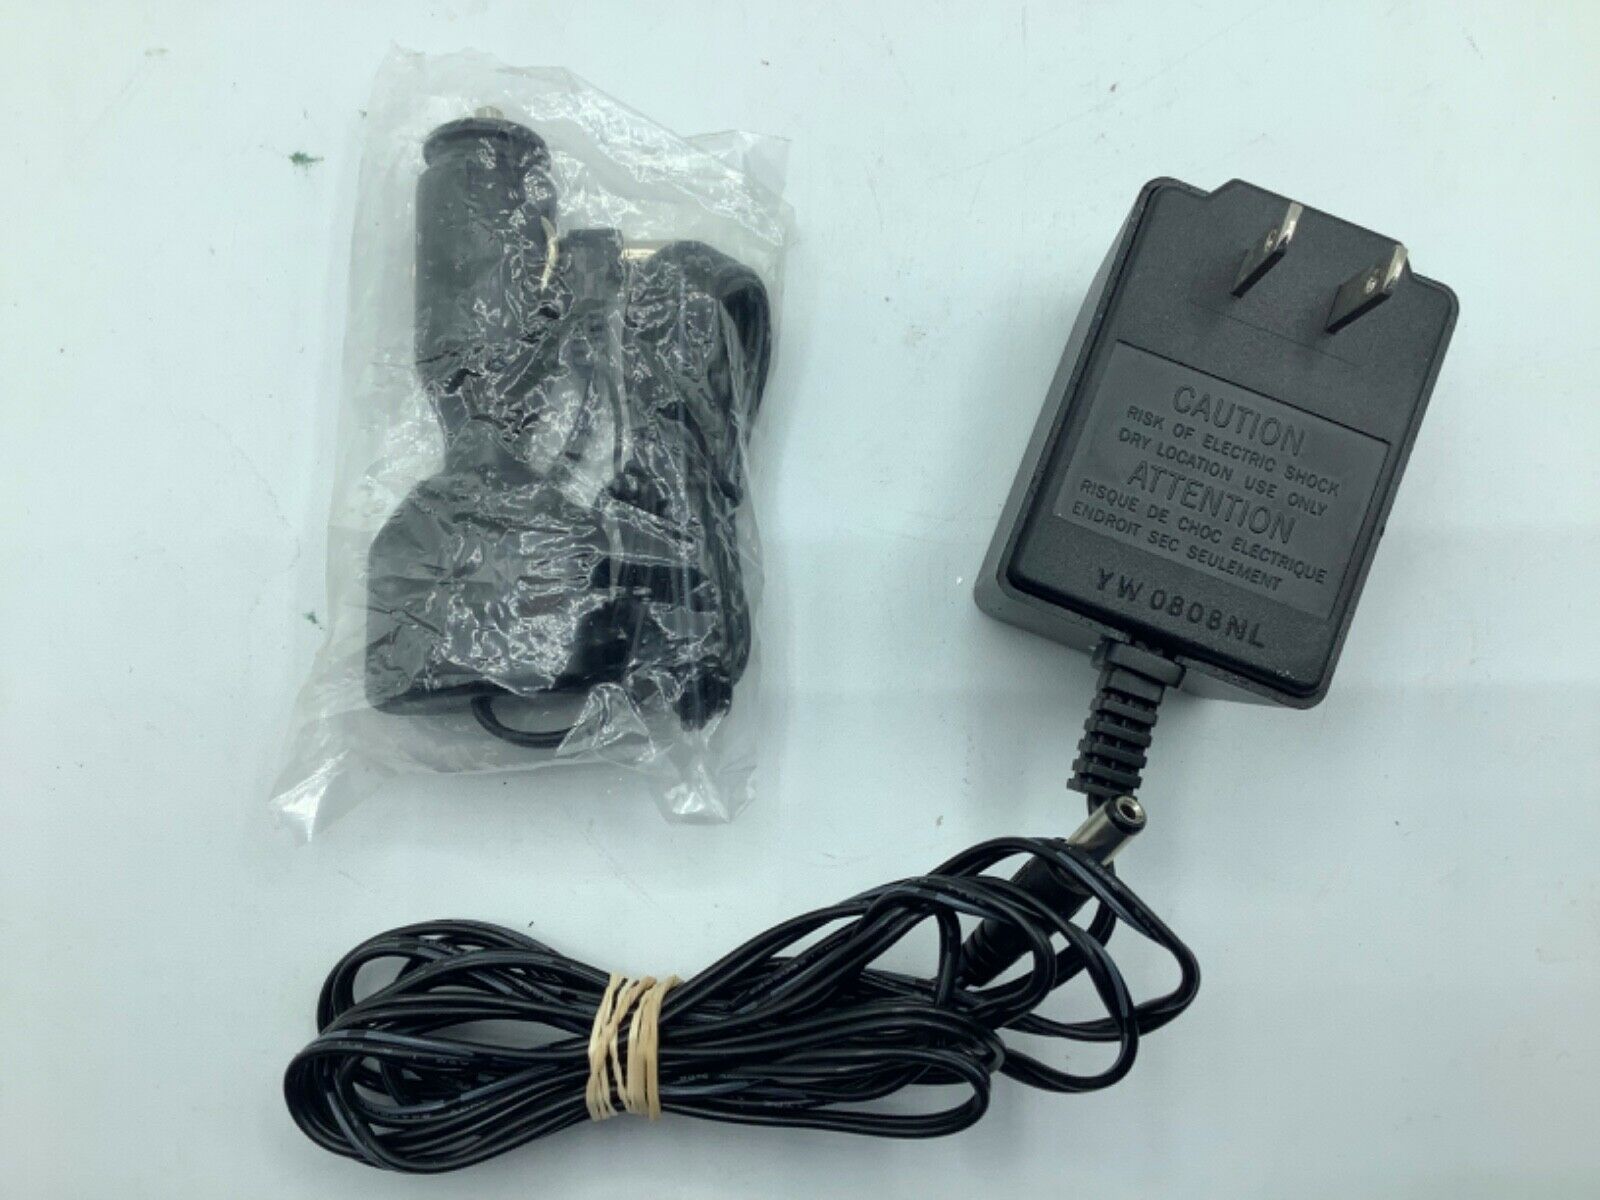 AC Adapter Charger For Coleman 5327A750 Rugged Lantern Switching Power Supply Type: AC/DC Adapter MPN: Does not appl